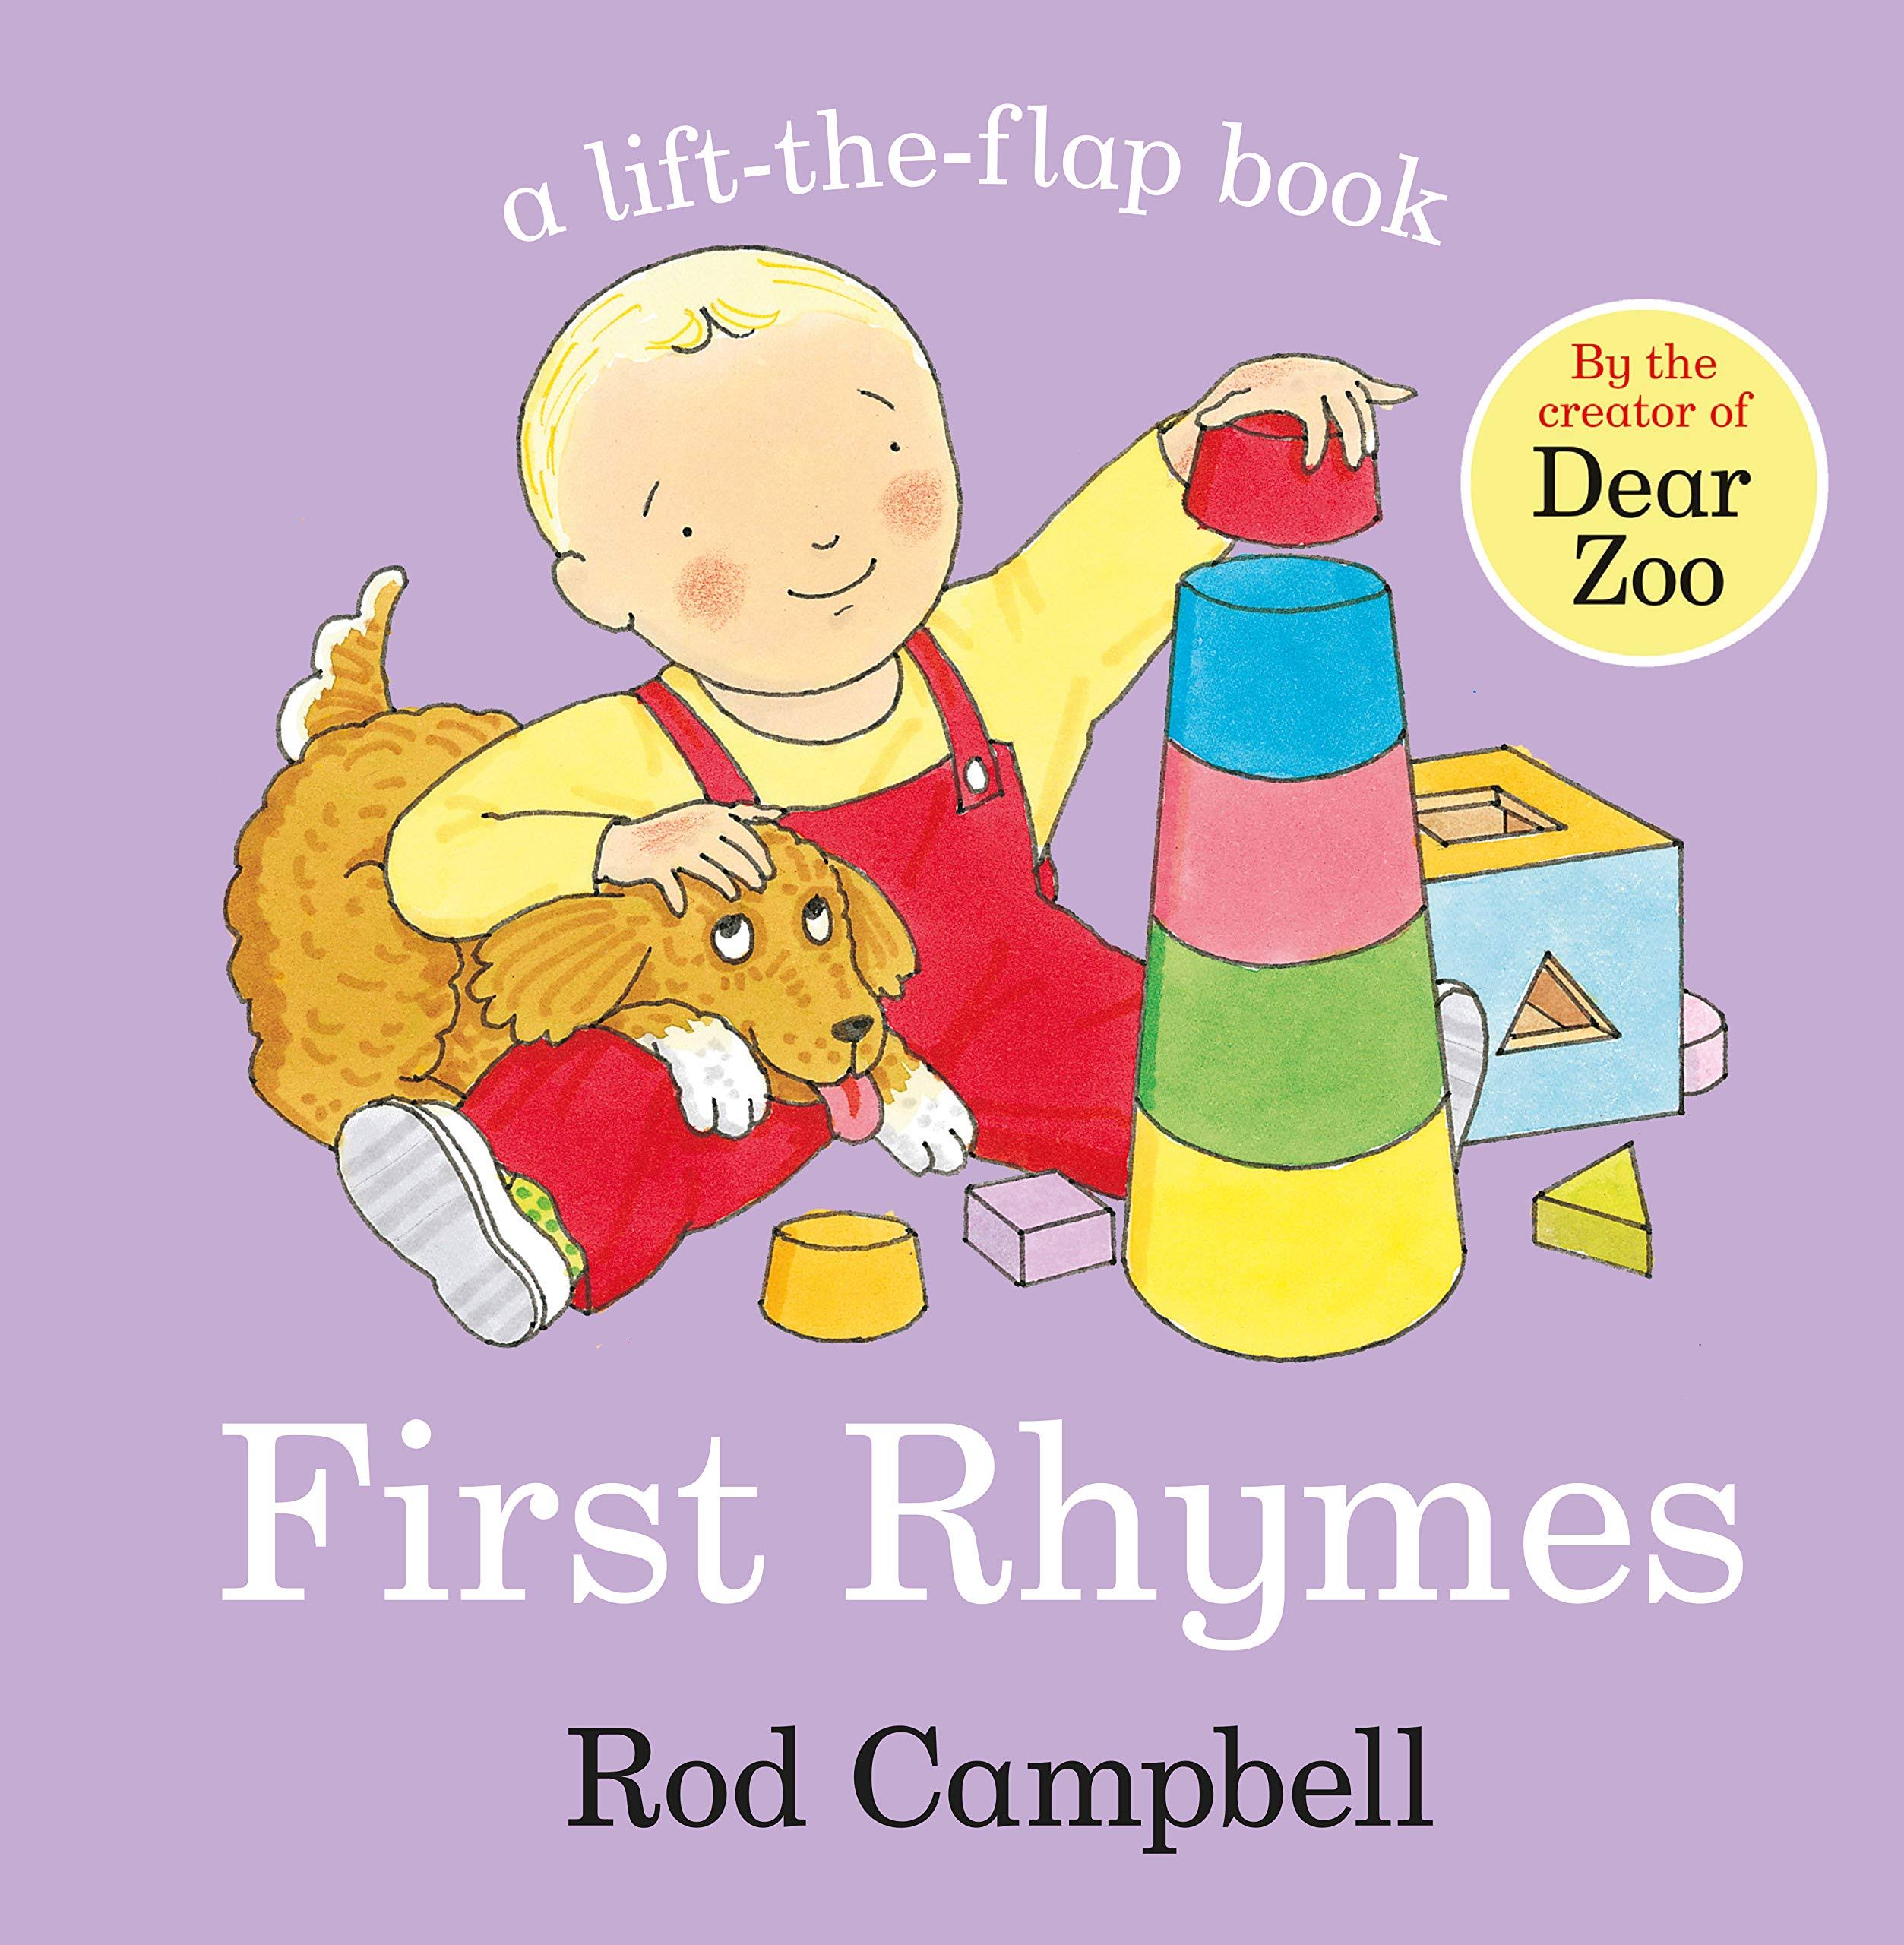 First Rhymes [Book]